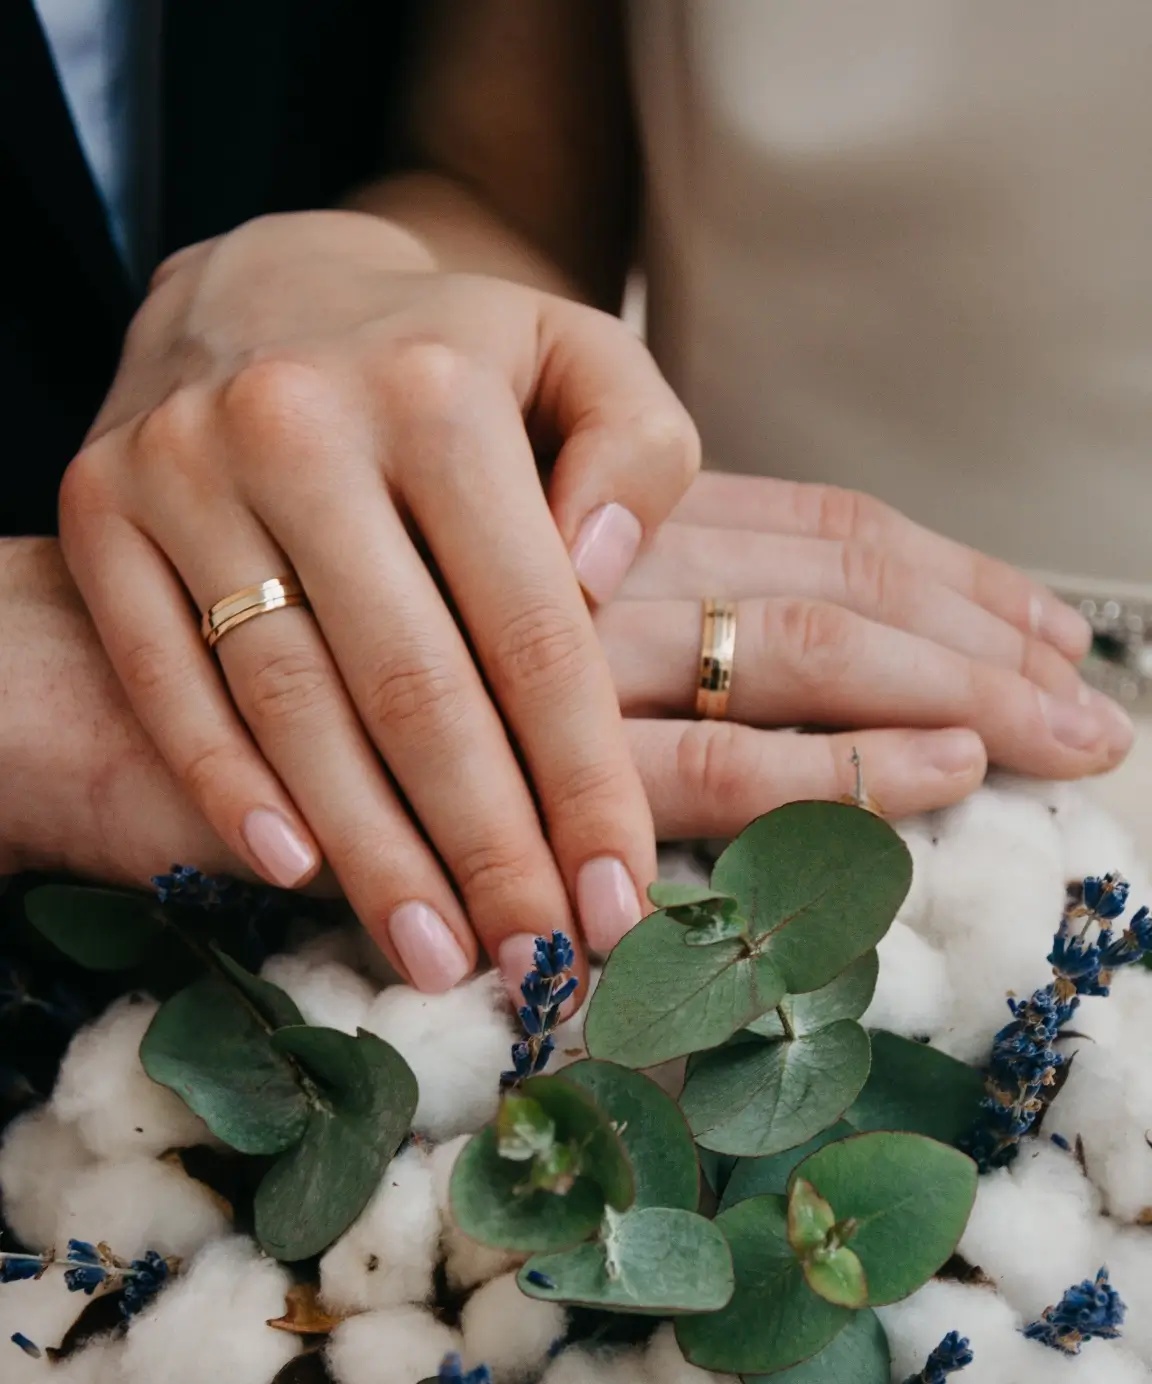 How to Pair a Unique Engagement Ring with a Wedding Band